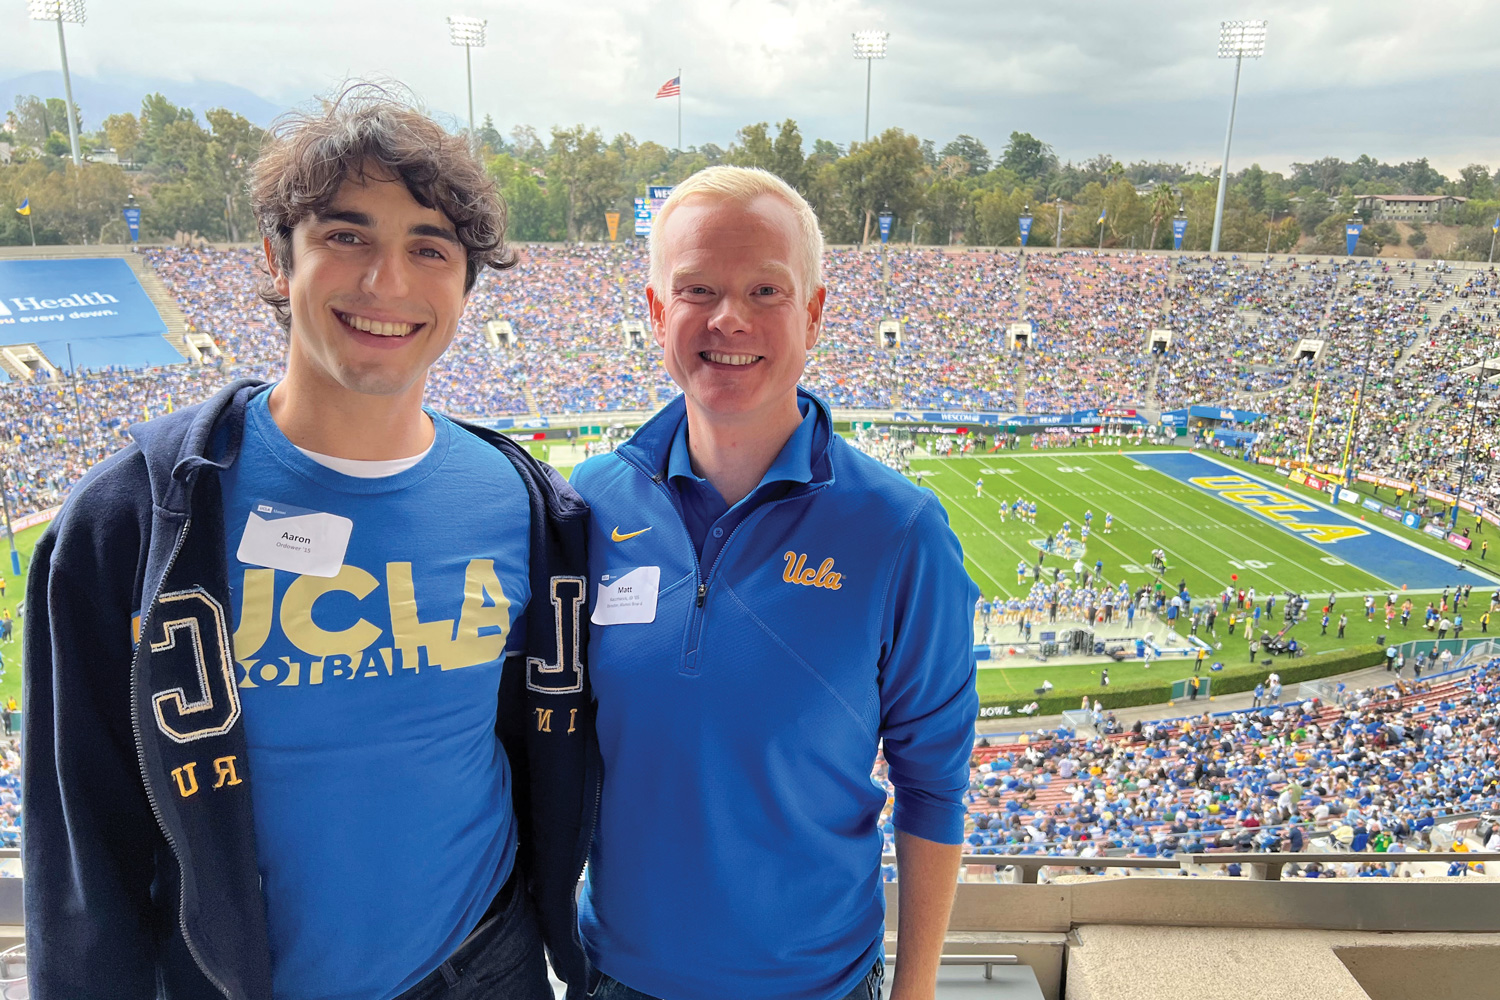 two young men smile in stands as UCLA football game goes on behind them